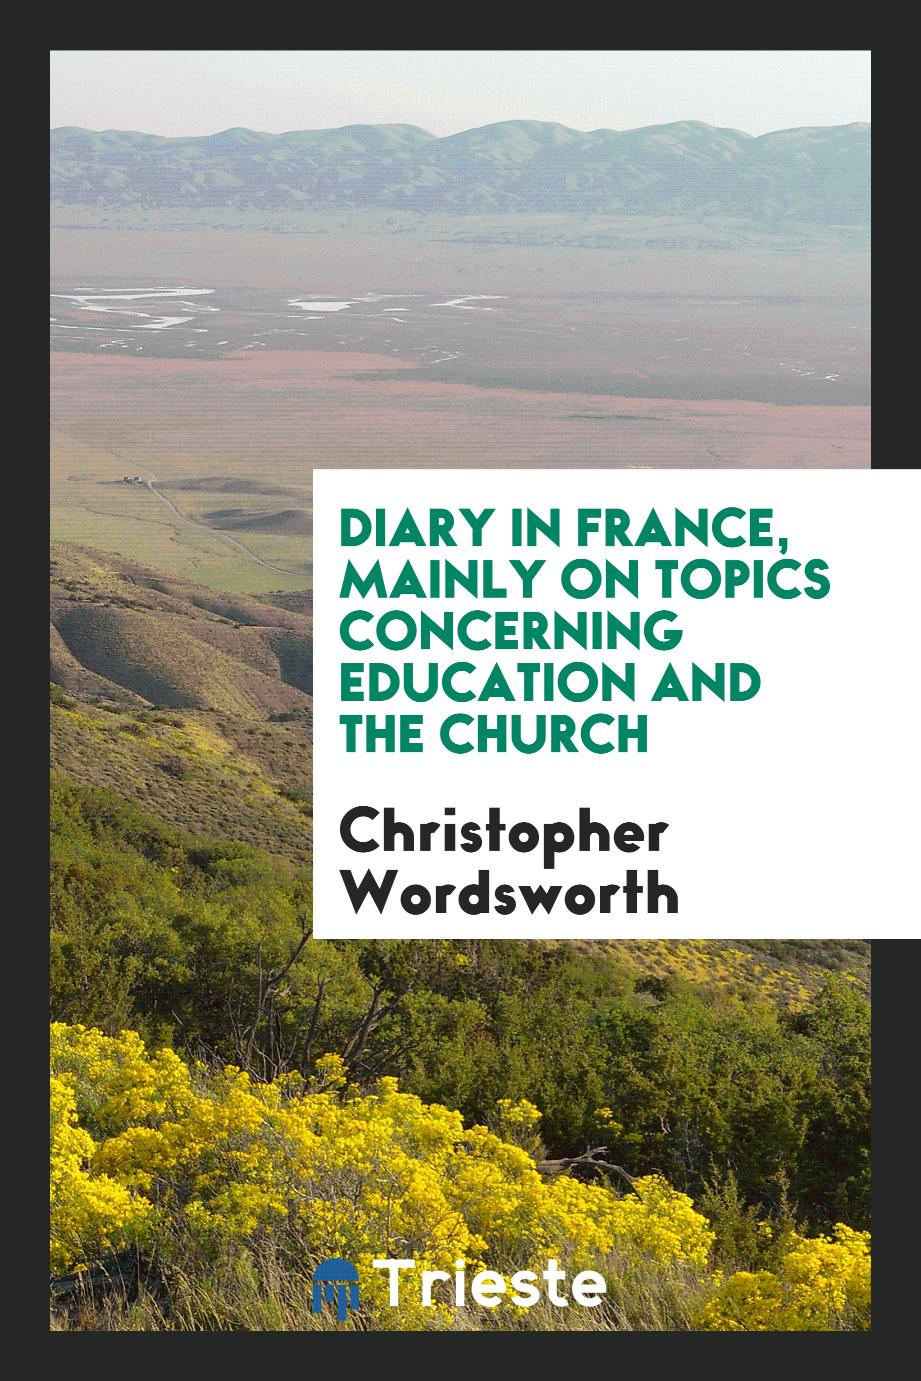 Diary in France, mainly on topics concerning education and the church